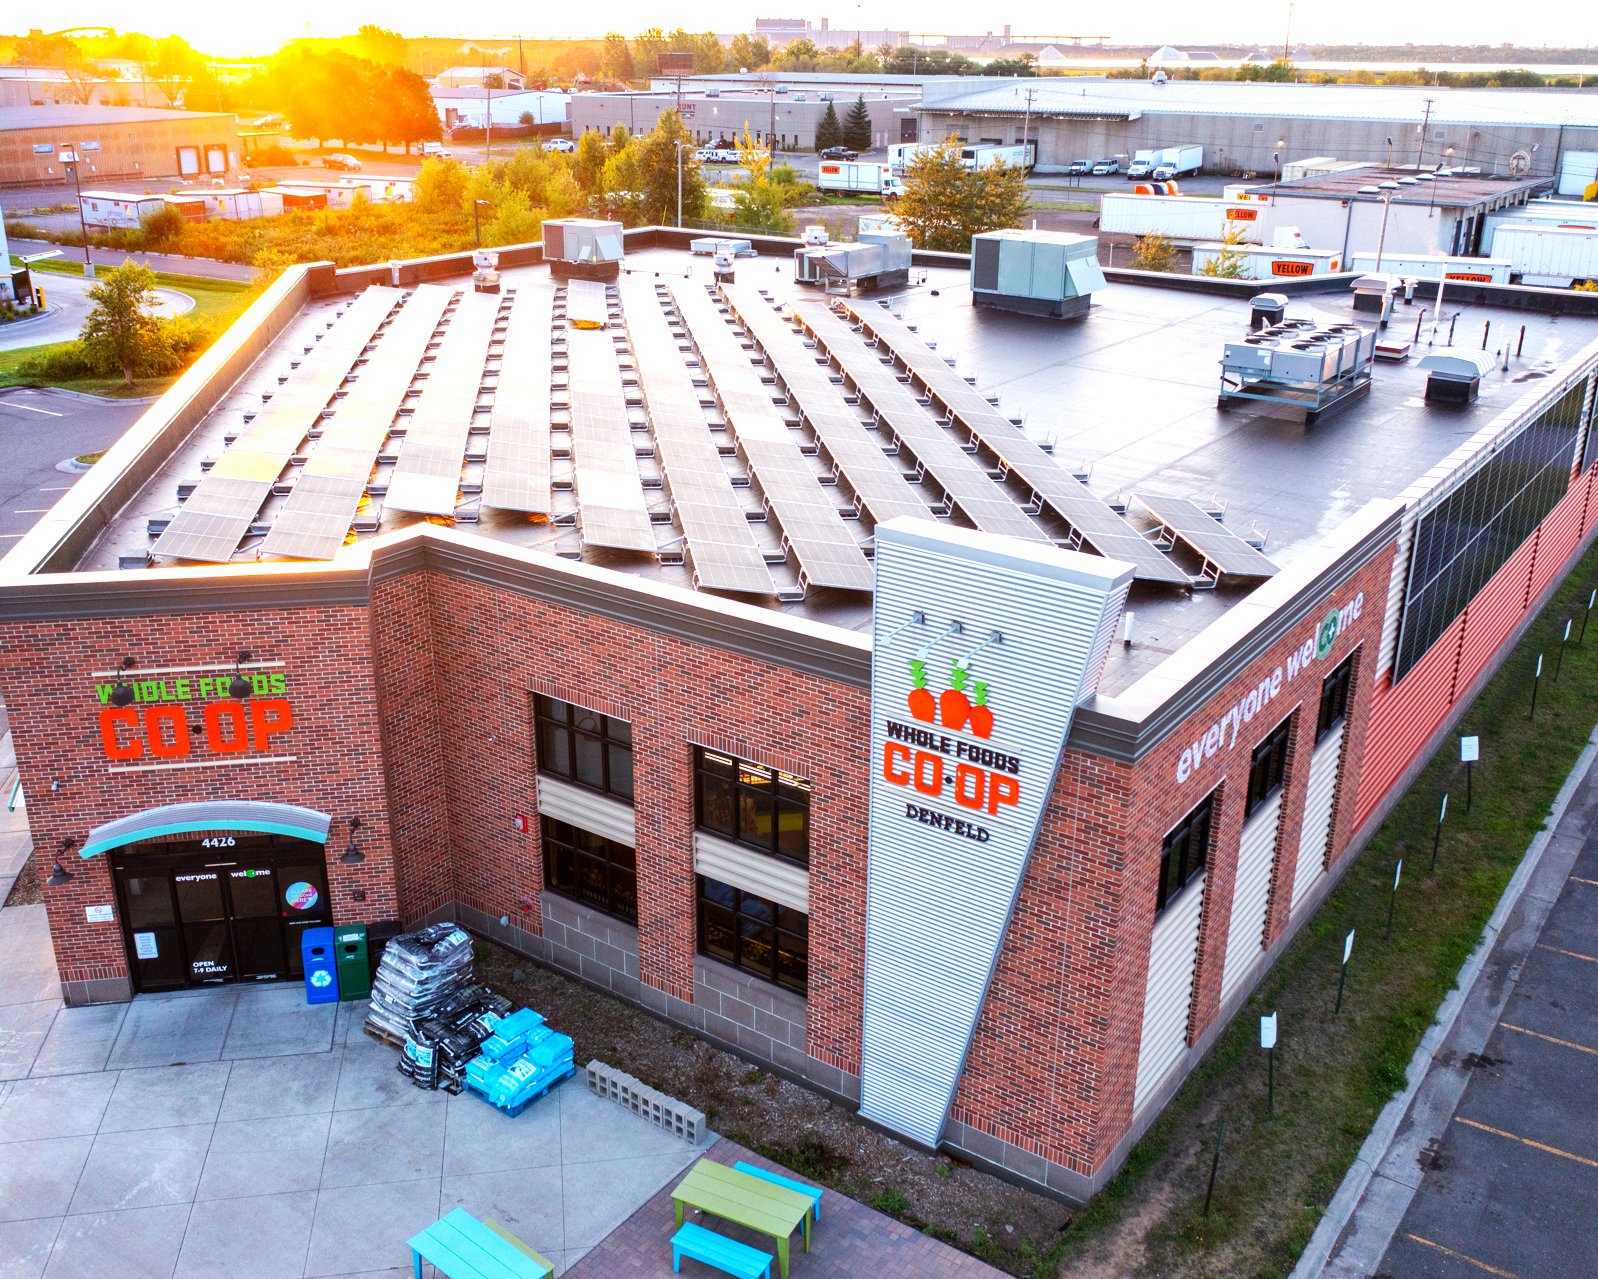 Brick building of the Denfeld Whole Foods store from an aerial view.